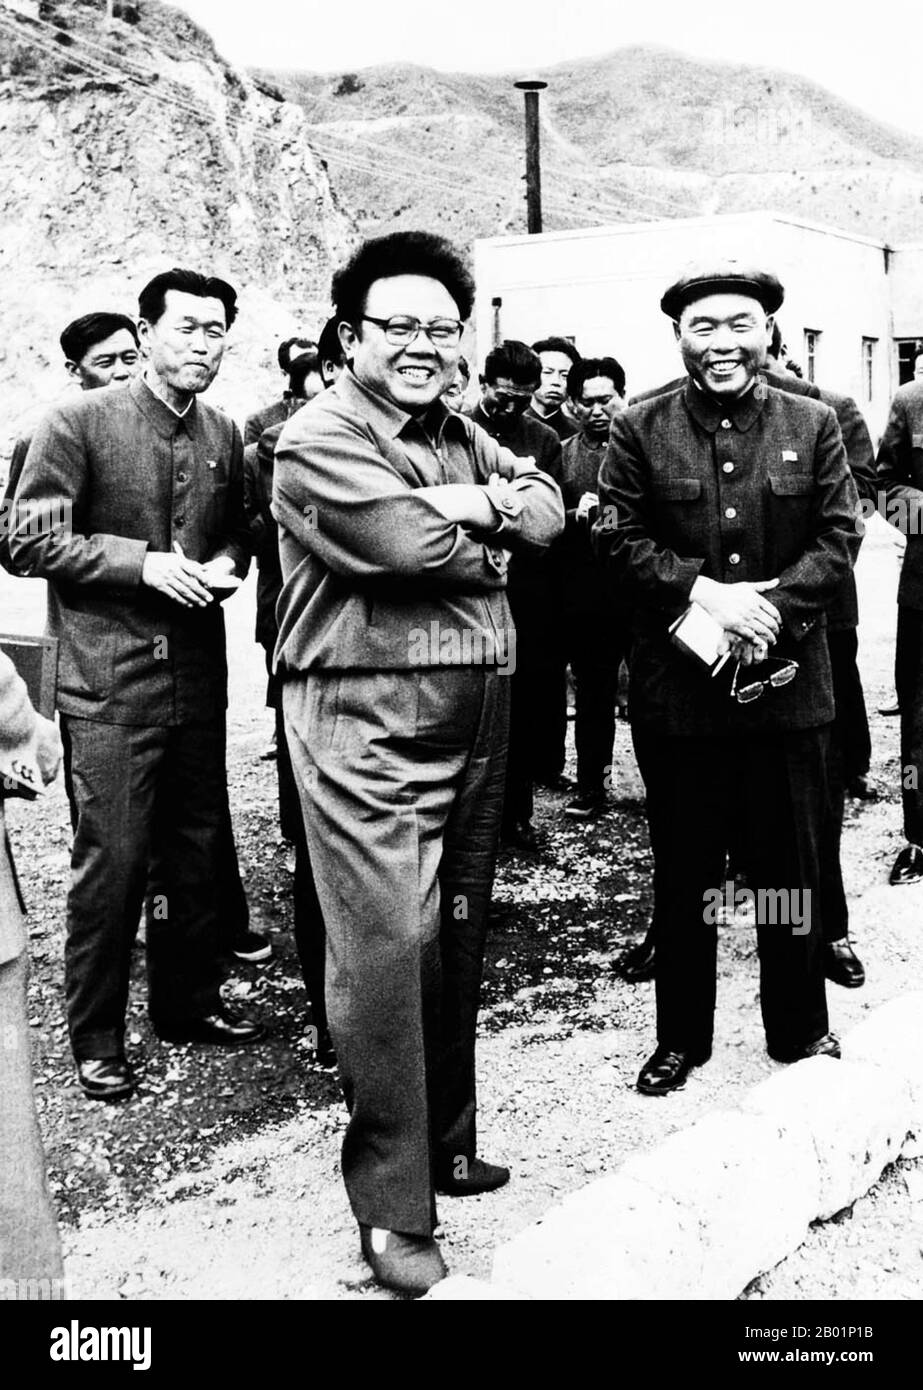 Korea: North Korean leader Kim Jong Il (16 February 1941/1942 - 17 December 2011) on an inspection tour at a mine, two years before succeeding his father, Kim Il Sung, as supreme leader, 1992.  Kim Jong-il was the supreme leader of North Korea (DPRK) from 1994 to 2011. He succeeded his father and founder of the DPRK Kim Il-sung following the elder Kim's death in 1994. Kim Jong-il was the General Secretary of the Workers' Party of Korea, Chairman of the National Defence Commission of North Korea, and the supreme commander of the Korean People's Army, the fourth-largest standing army globally. Stock Photo